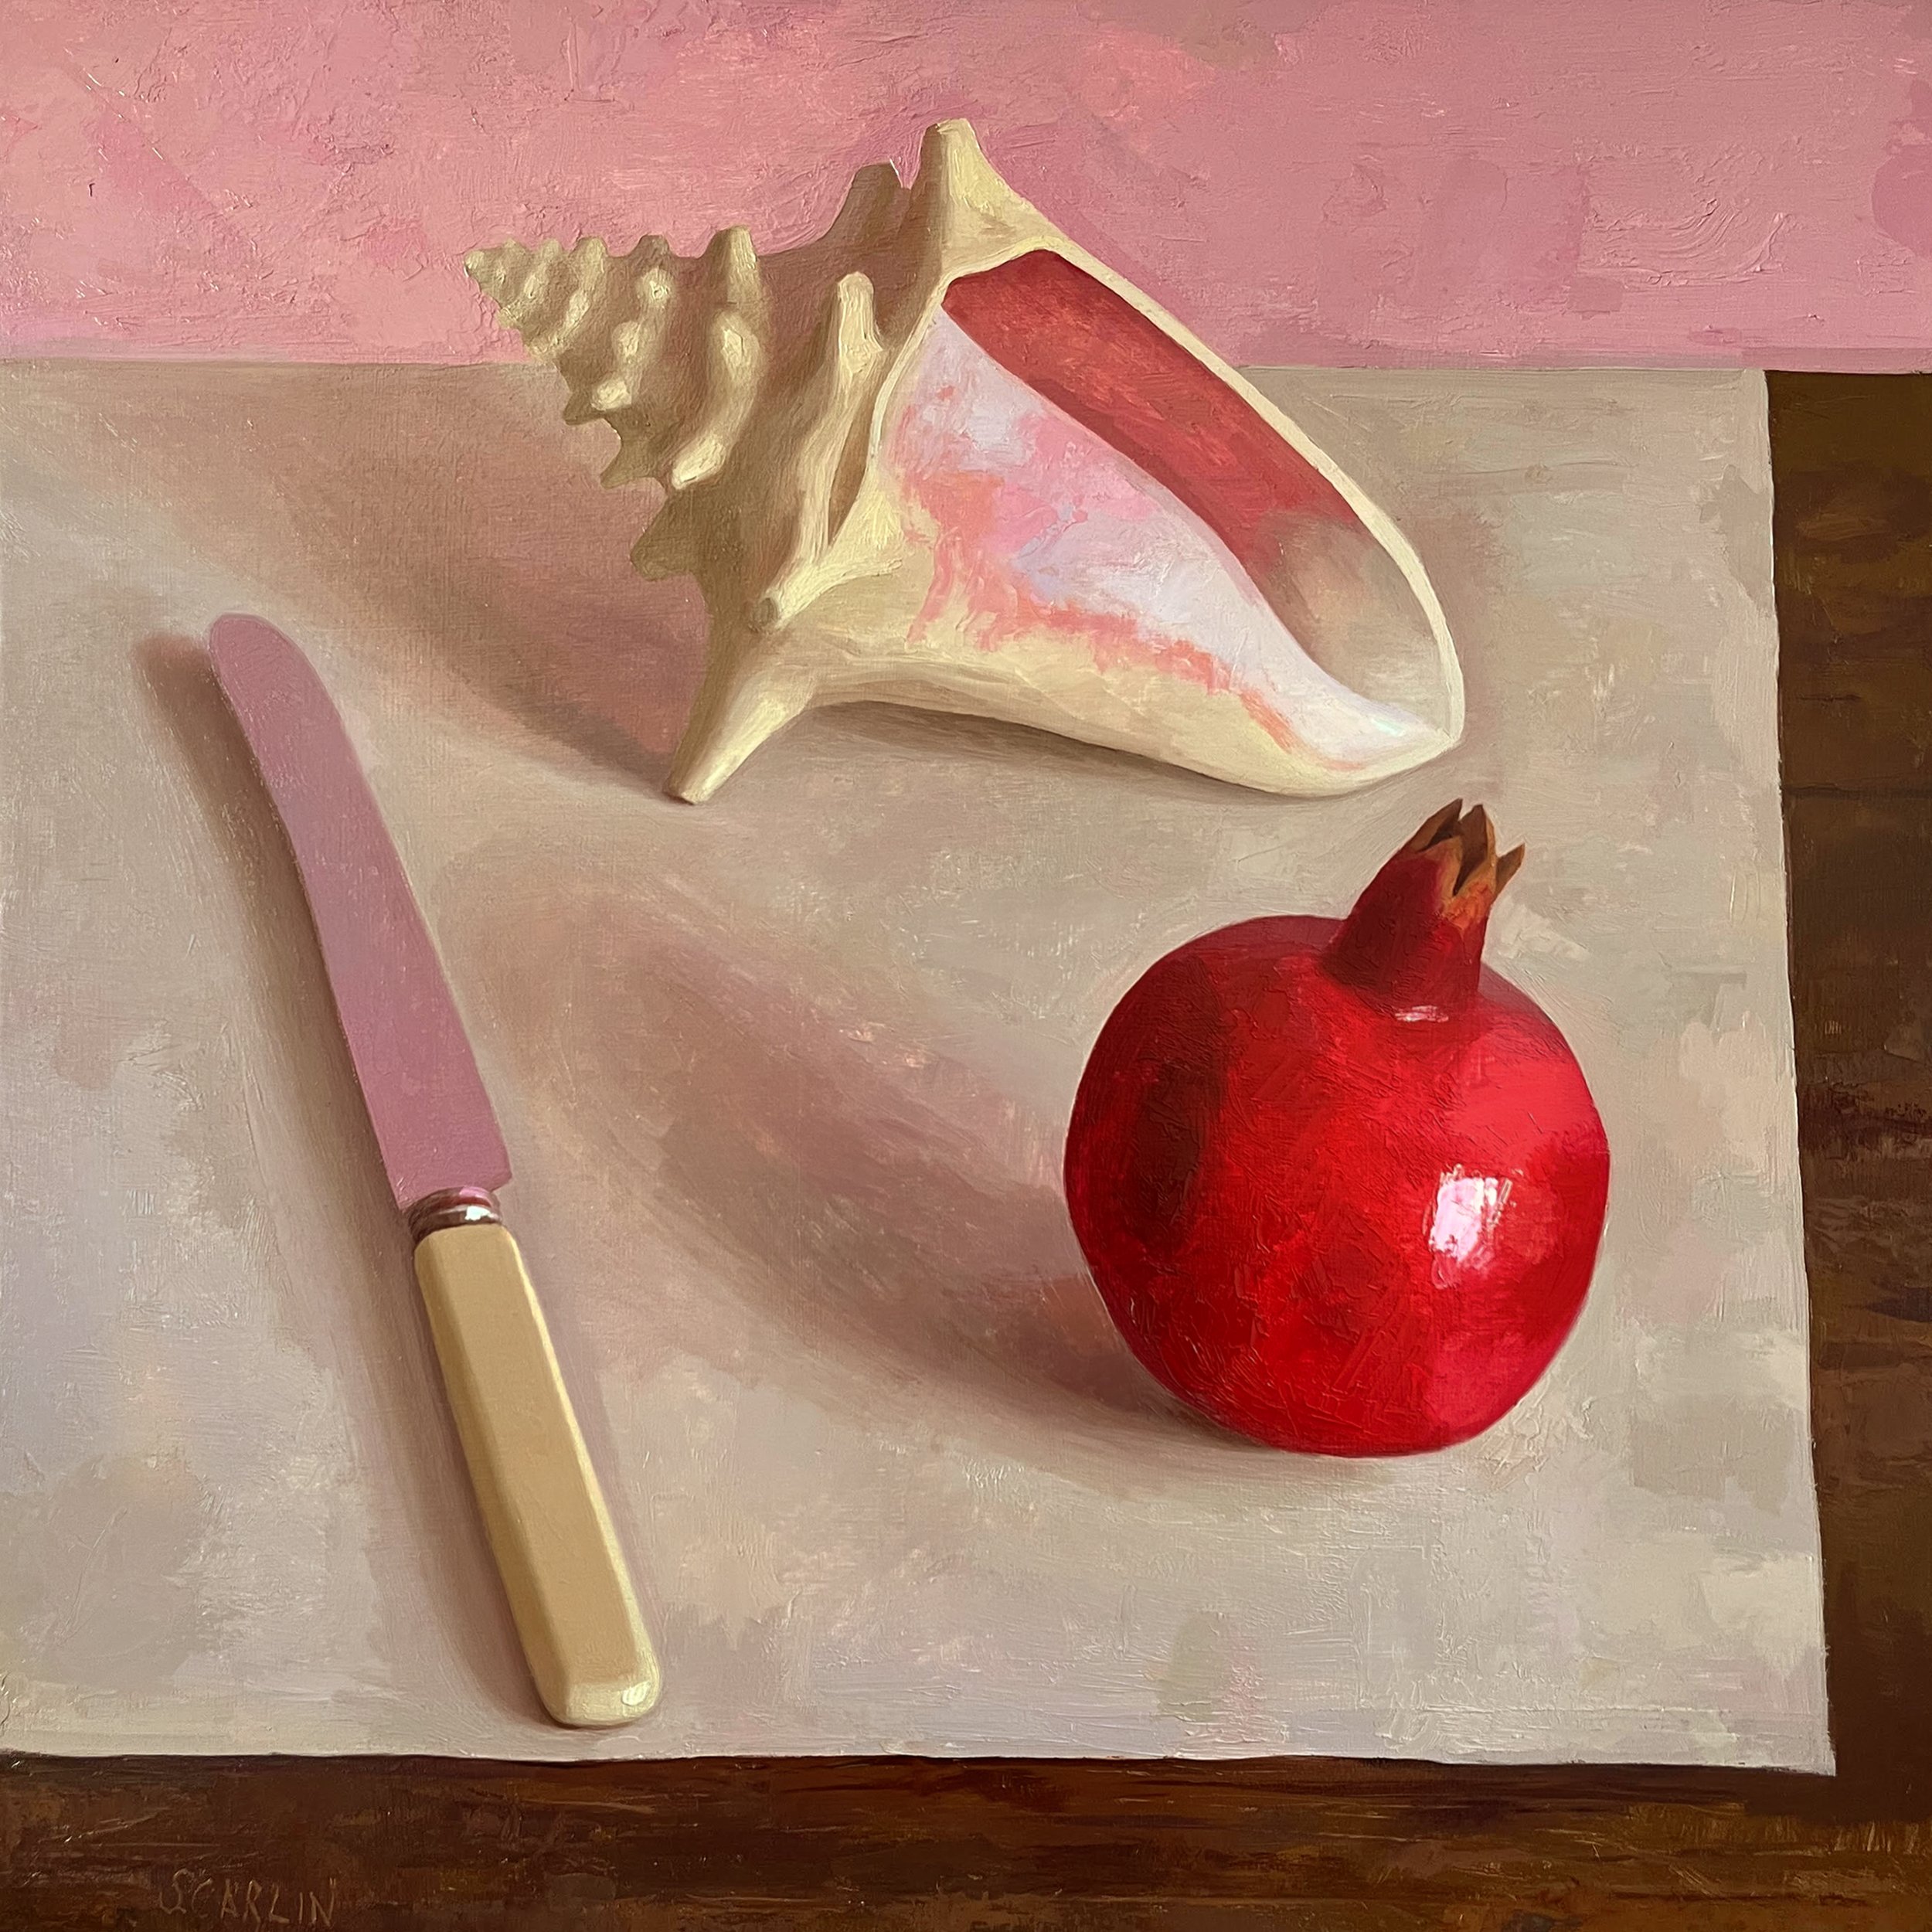  Shell, pomegranate &amp; Knife (2022)  Oil on panel 41 x 41cm  Framed (floating natural wood frame)    Private collection 